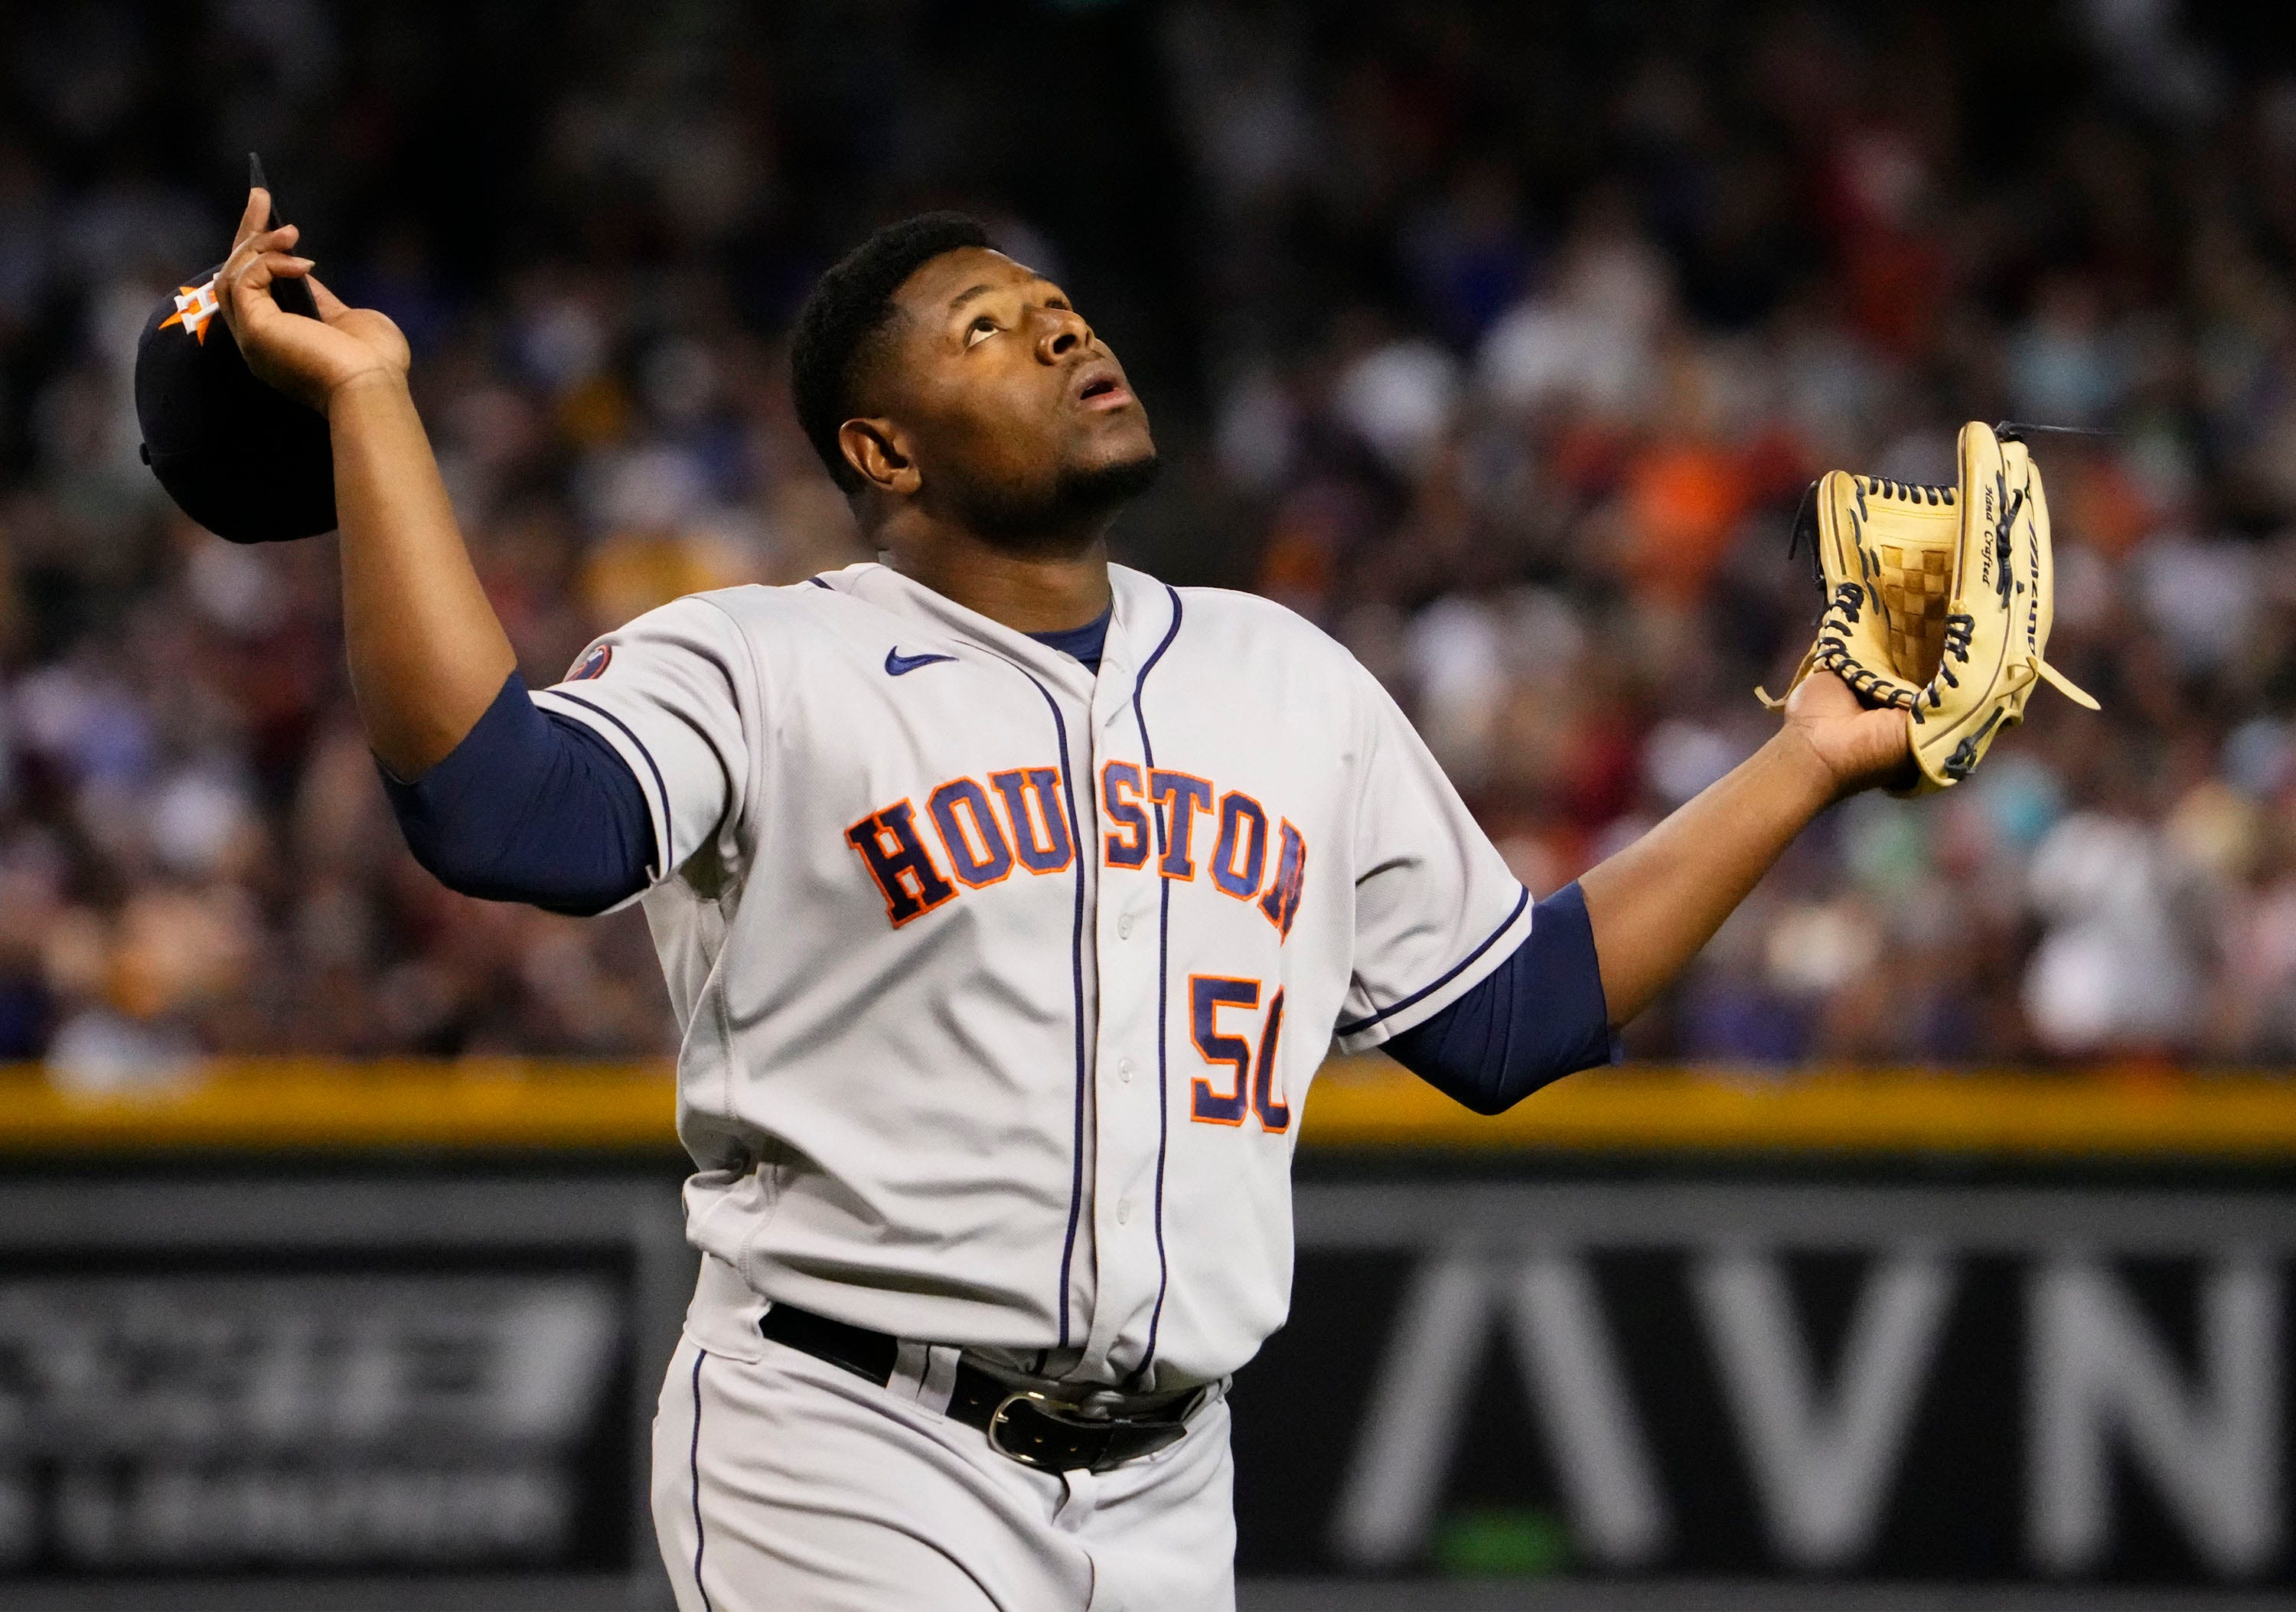 Houston Astros ALDS Game 2: Astros fall short with 6-2 loss